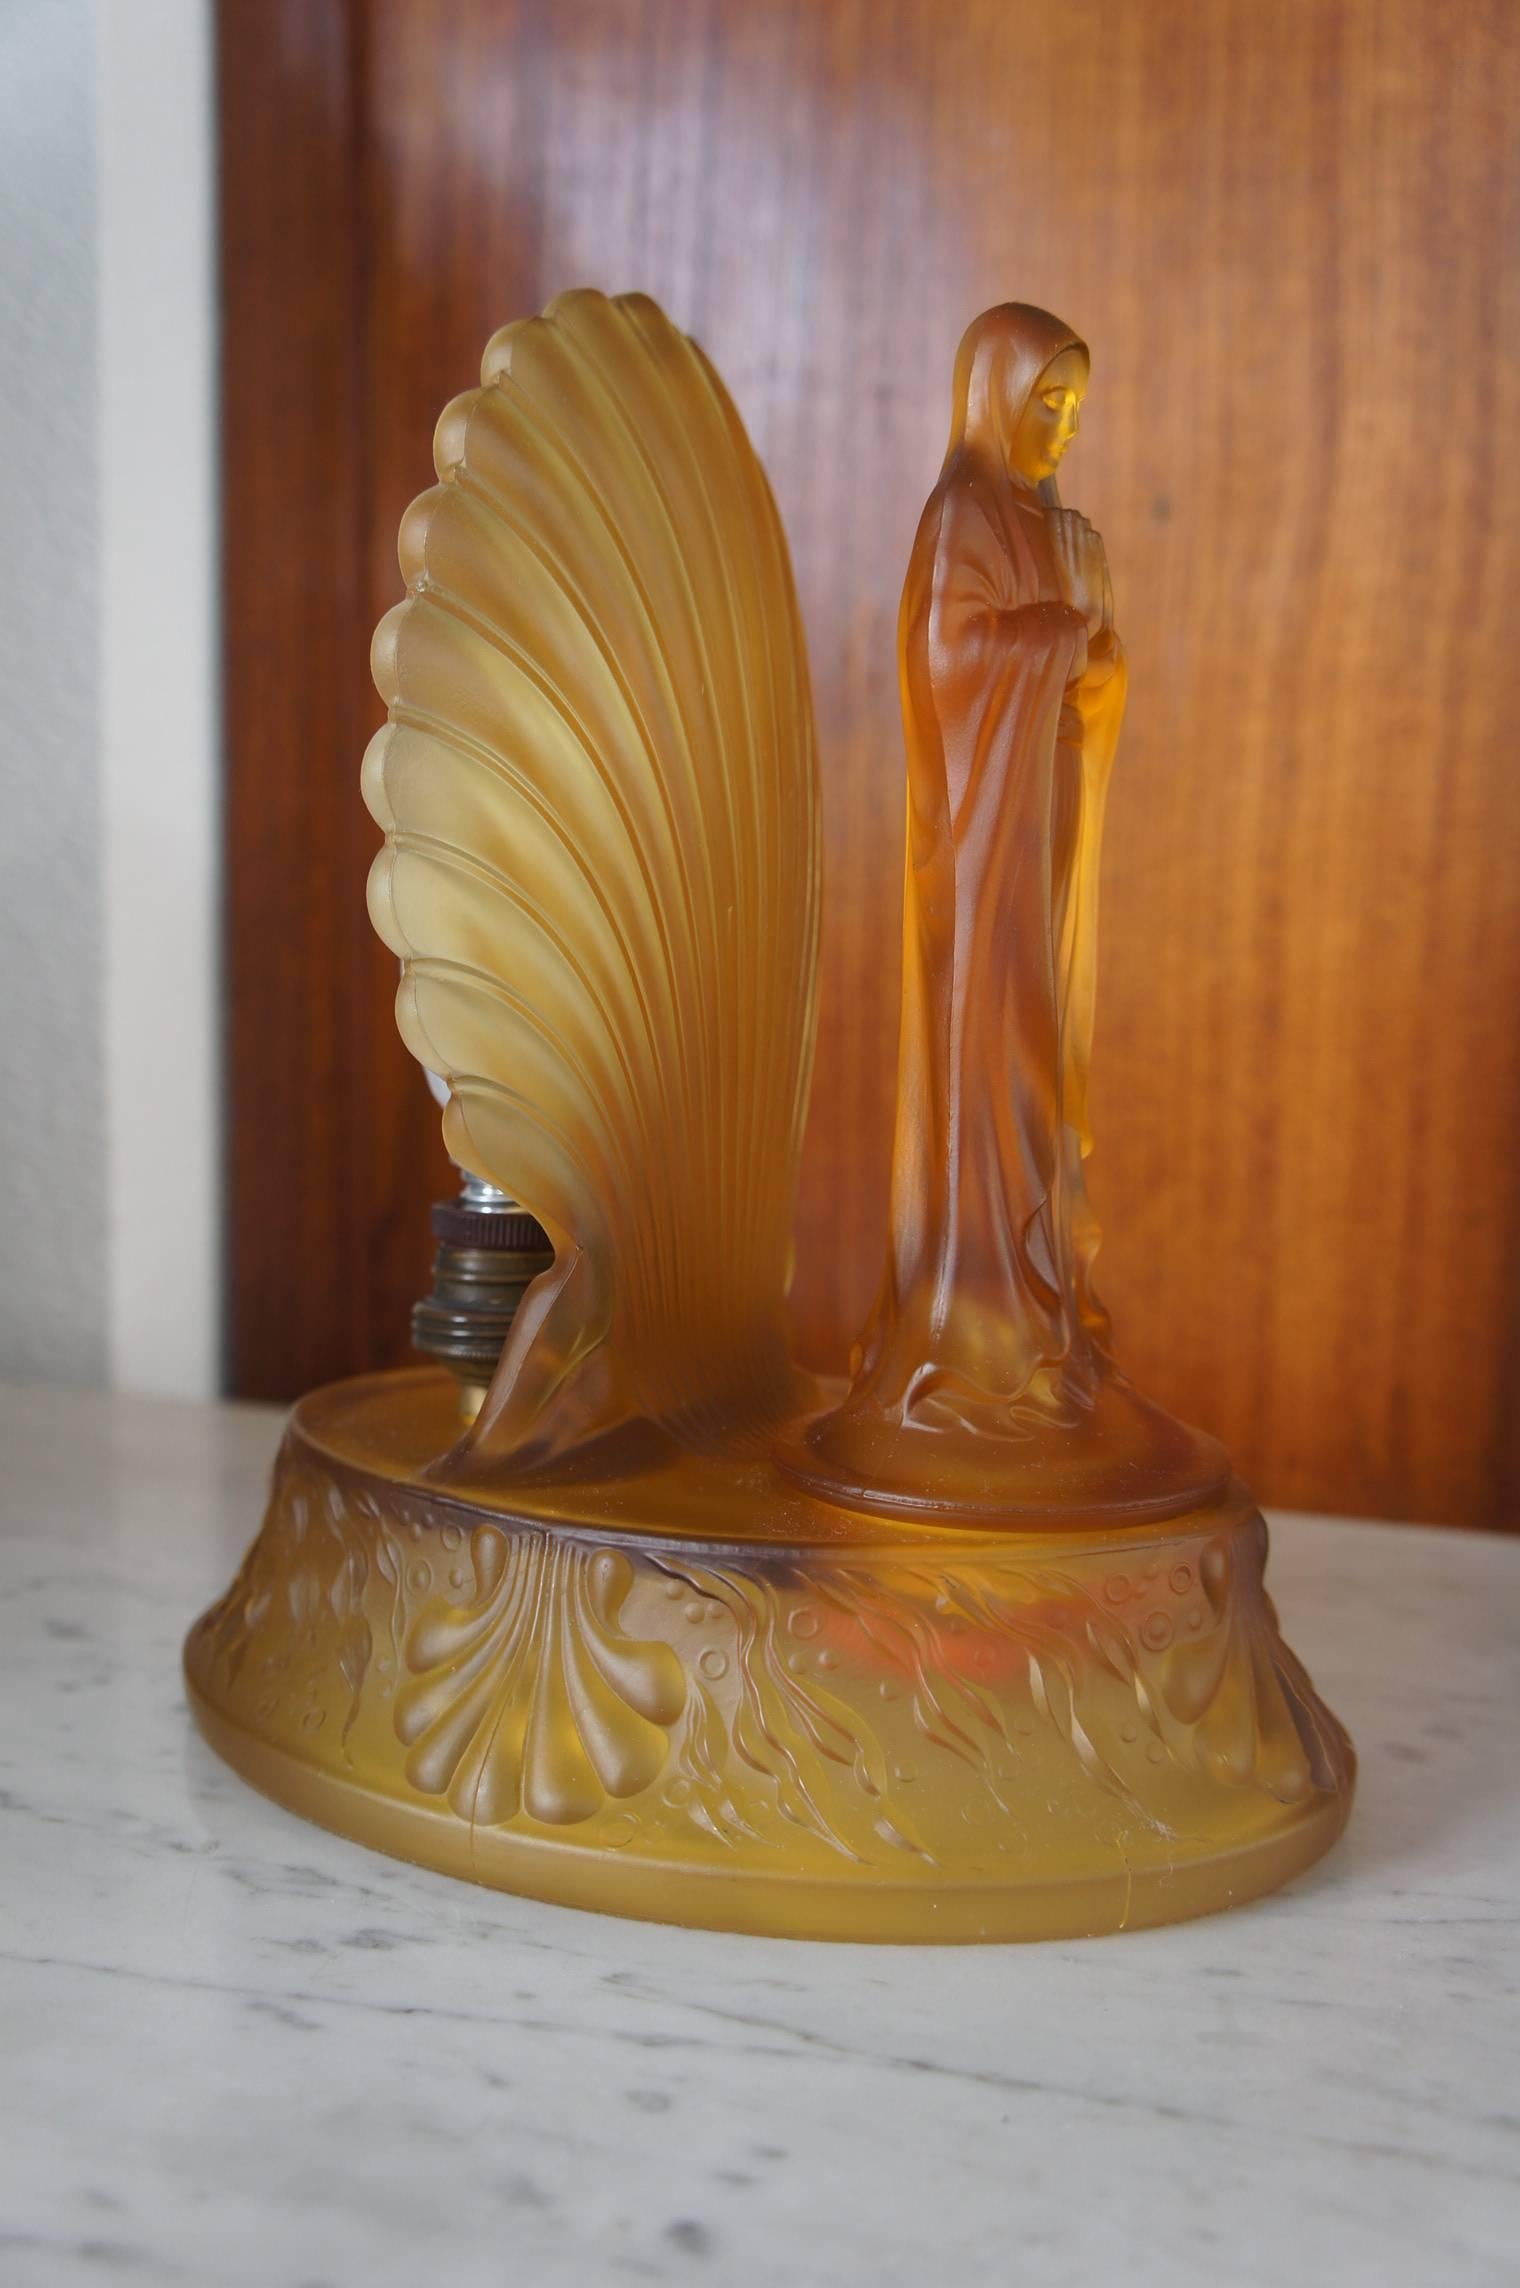 Stunning Art Deco 'Pressed Glass' Shell Lamp with Maria / Lady Madonna in Prayer 1